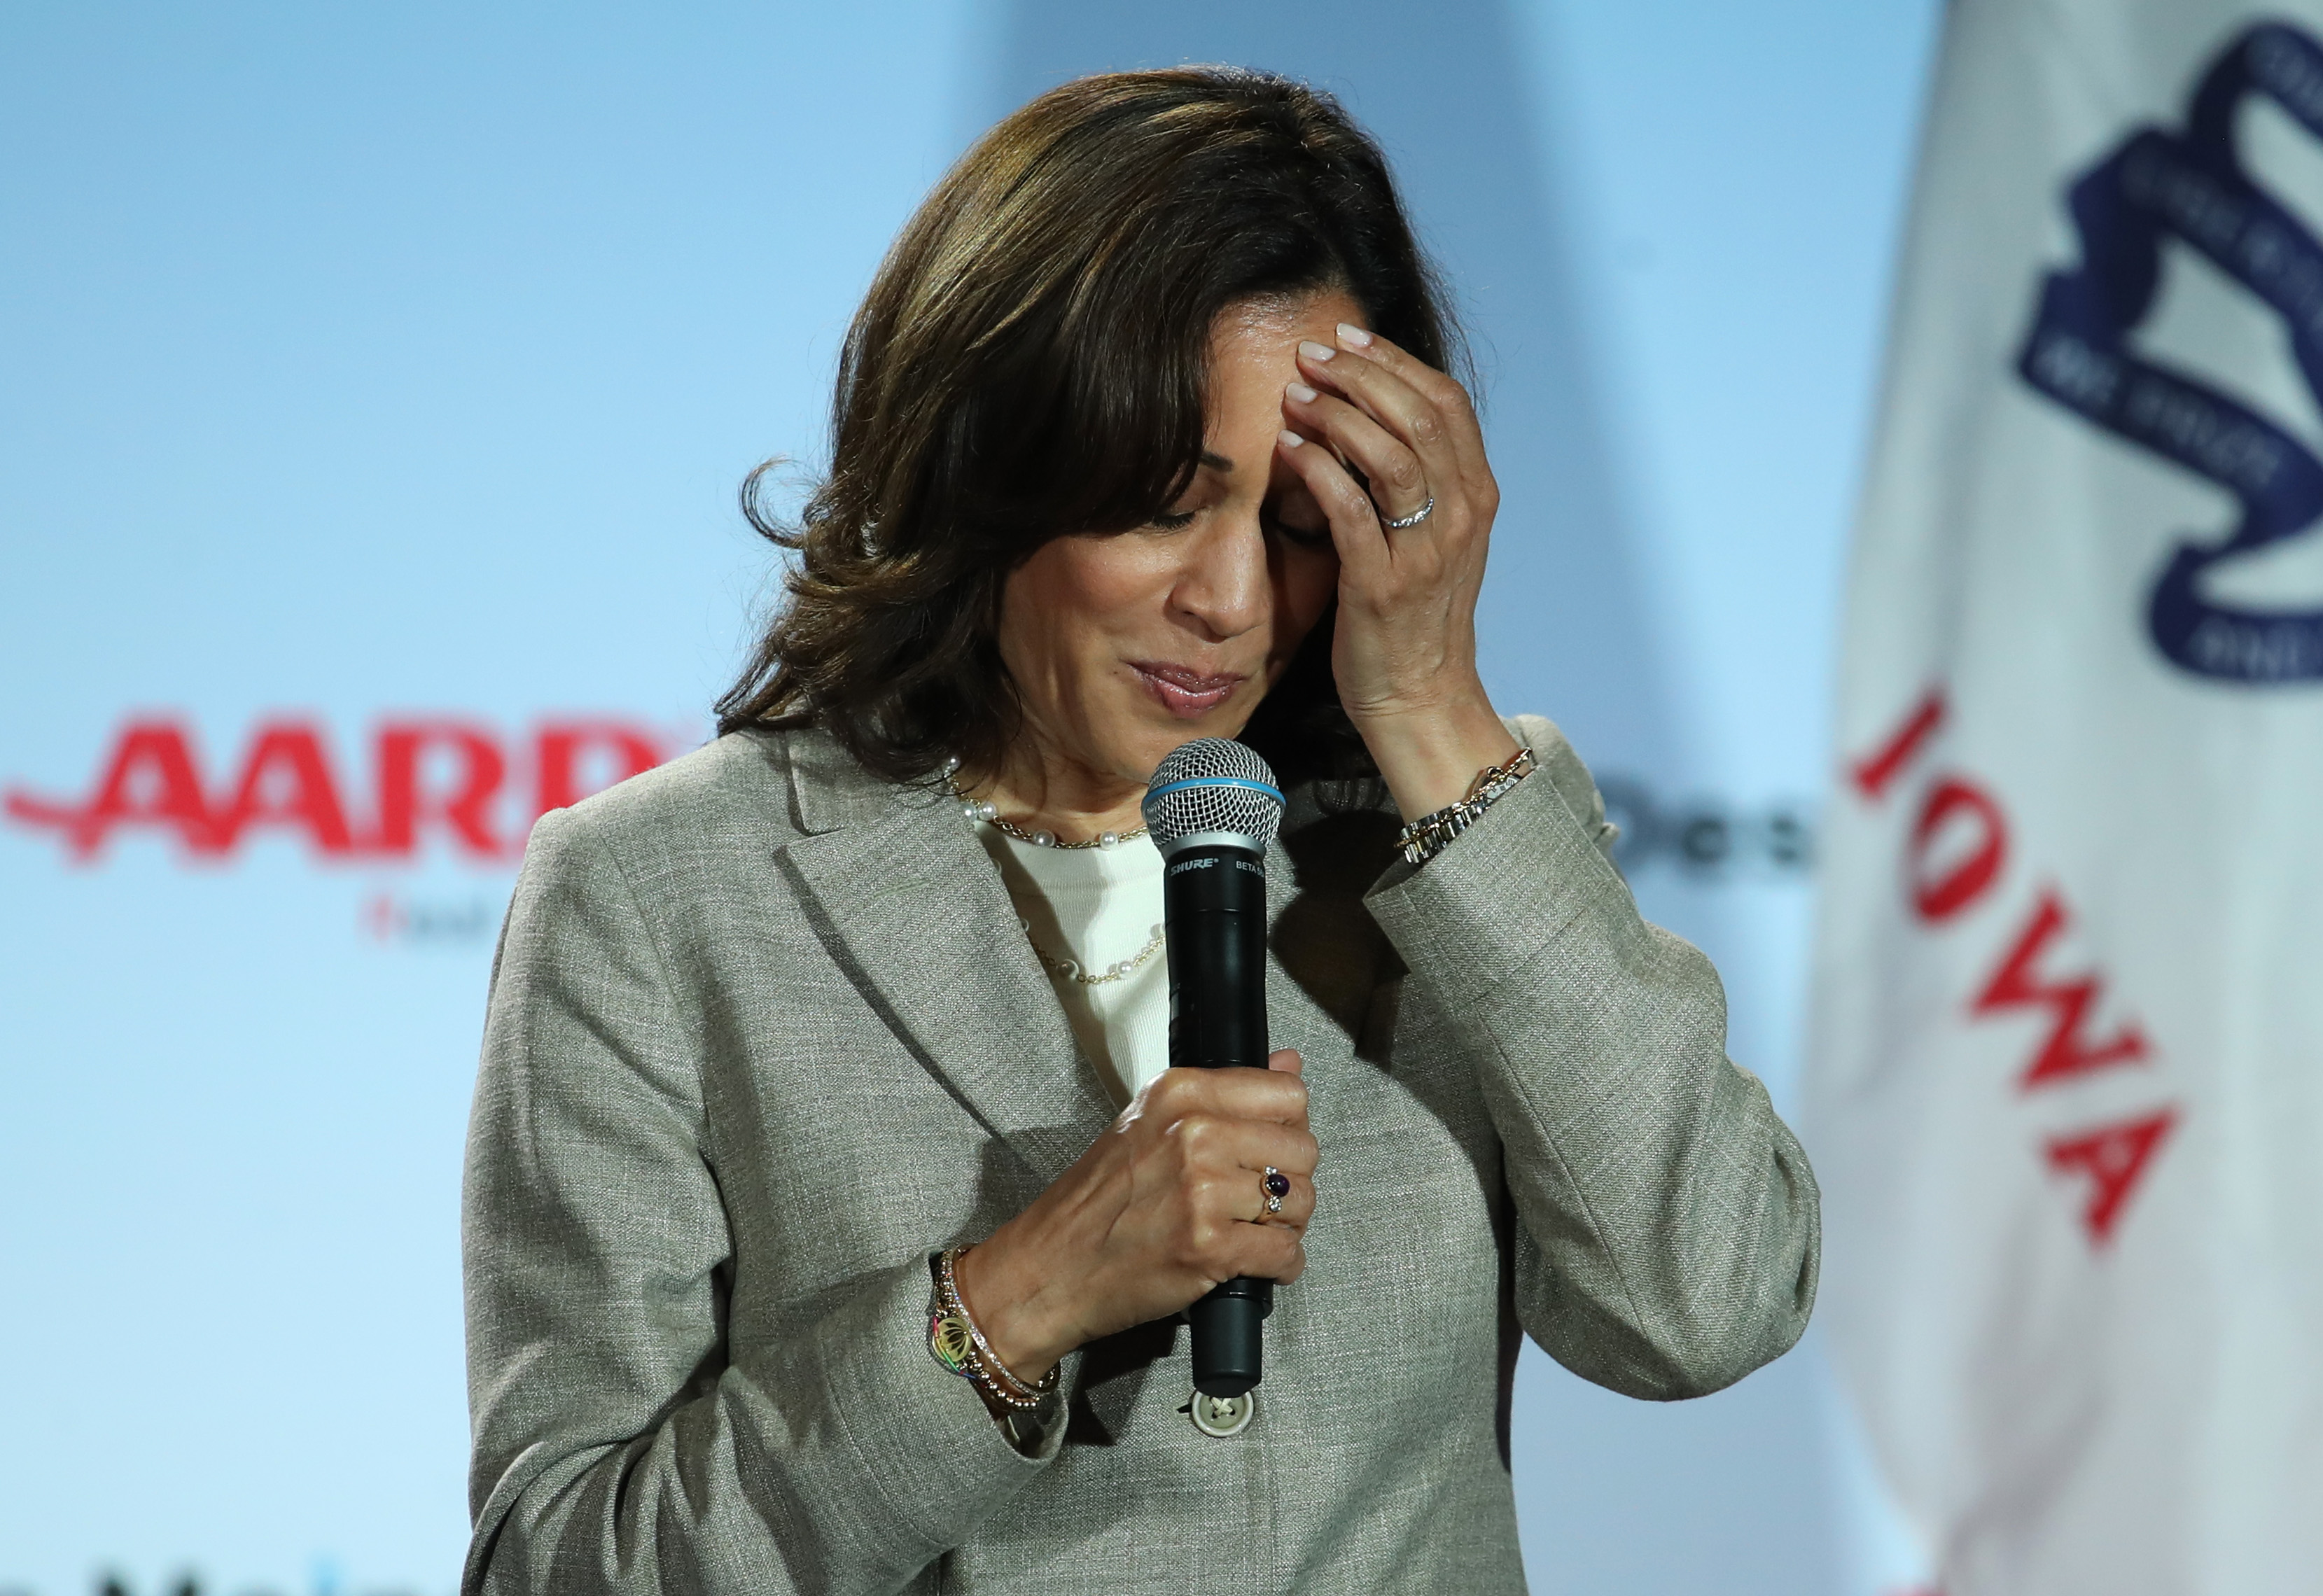 BETTENDORF, IOWA - JULY 16: Democratic presidential candidate U.S. Sen. Kamala Harris (D-CA) speaks during the AARP and The Des Moines Register Iowa Presidential Candidate Forum on July 16, 2019 in Bettendorf, Iowa. Twenty democratic presidential candidates are participating in the AARP and Des Moines Register candidate forums that will feature four candidates per forum that are being to be held in cities across Iowa over five days. (Photo by Justin Sullivan/Getty Images)